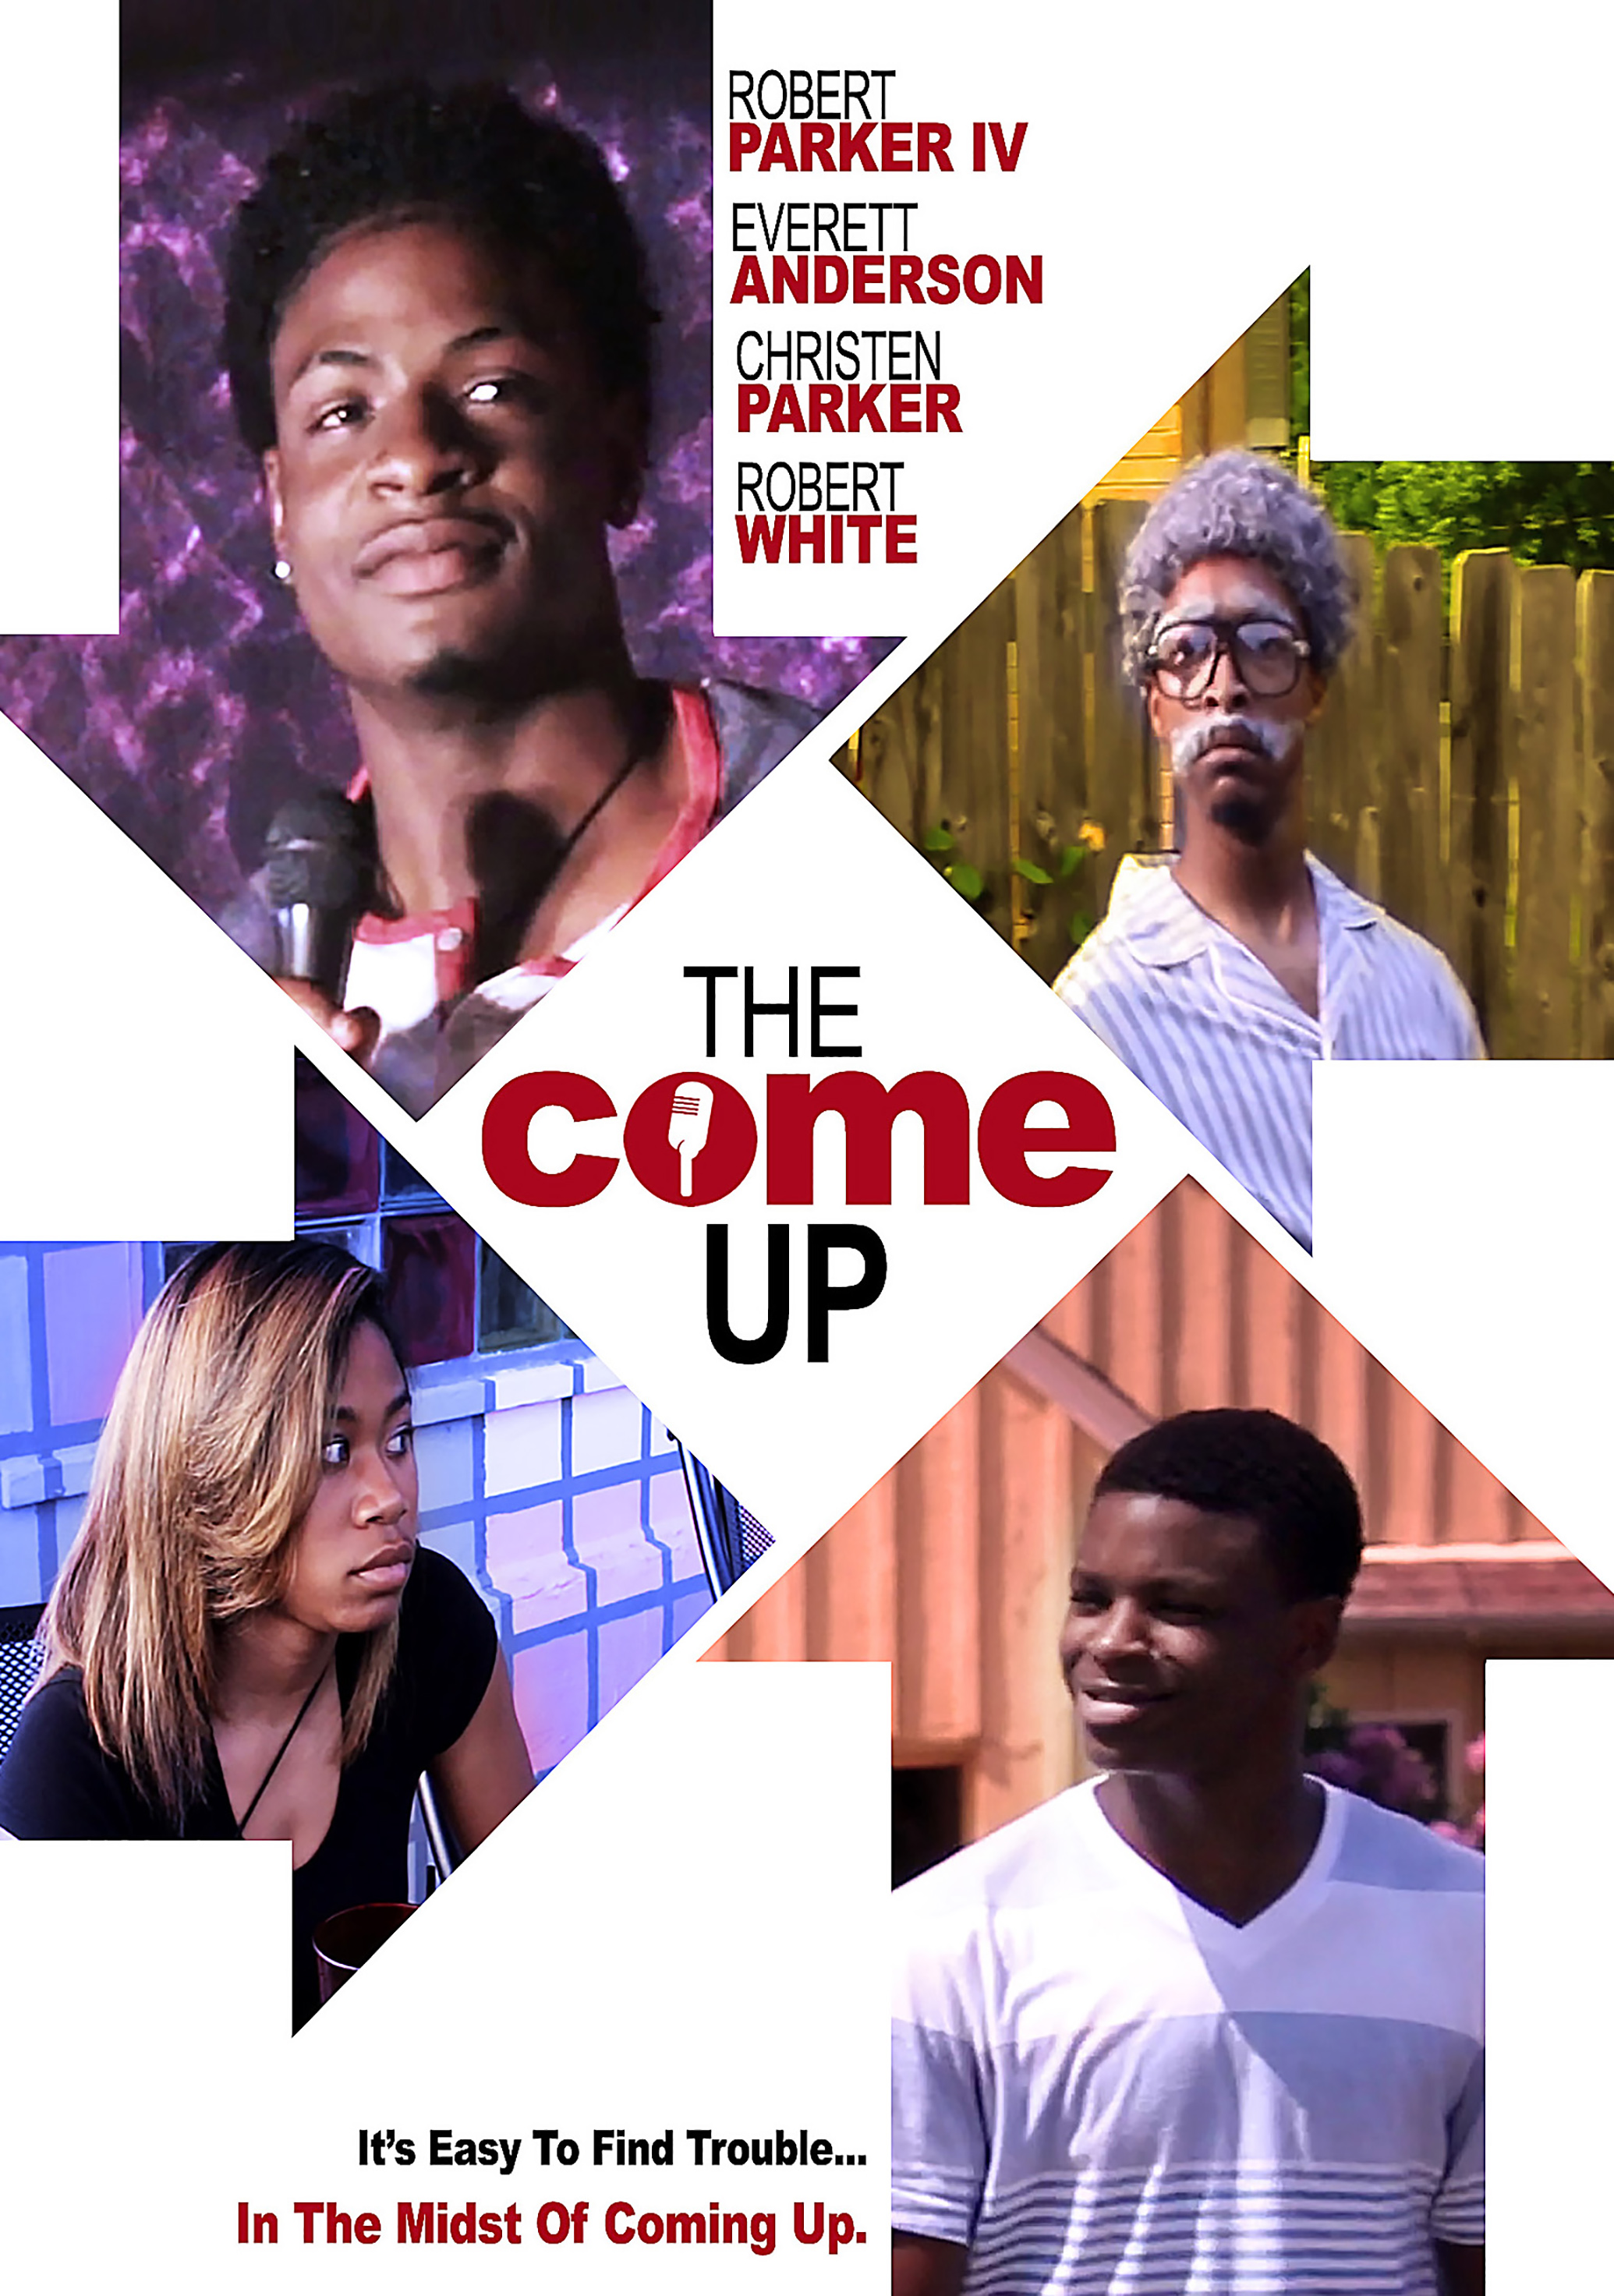 The Come Up (2016) Comedy, Directed By Robert L. Parker III